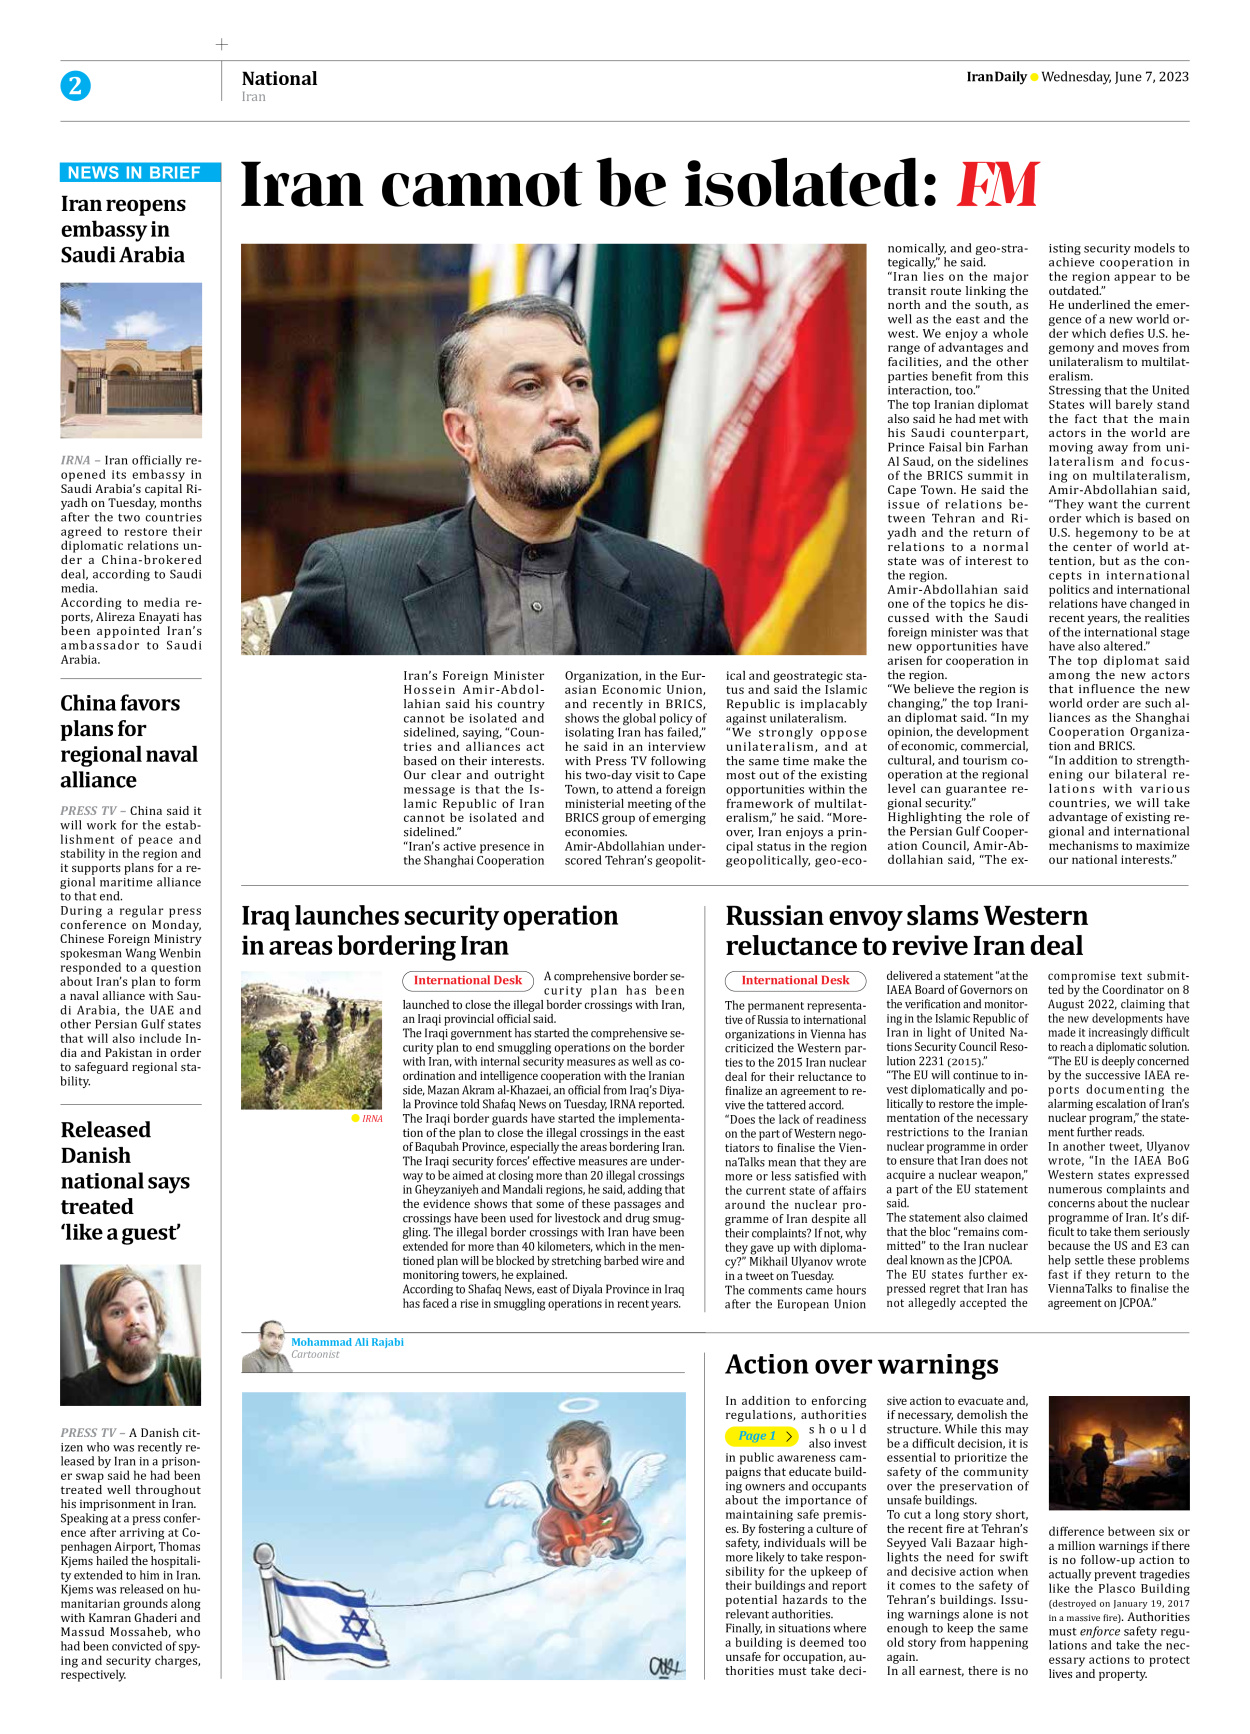 Iran Daily - Number Seven Thousand Three Hundred and Eight - 07 June 2023 - Page 2